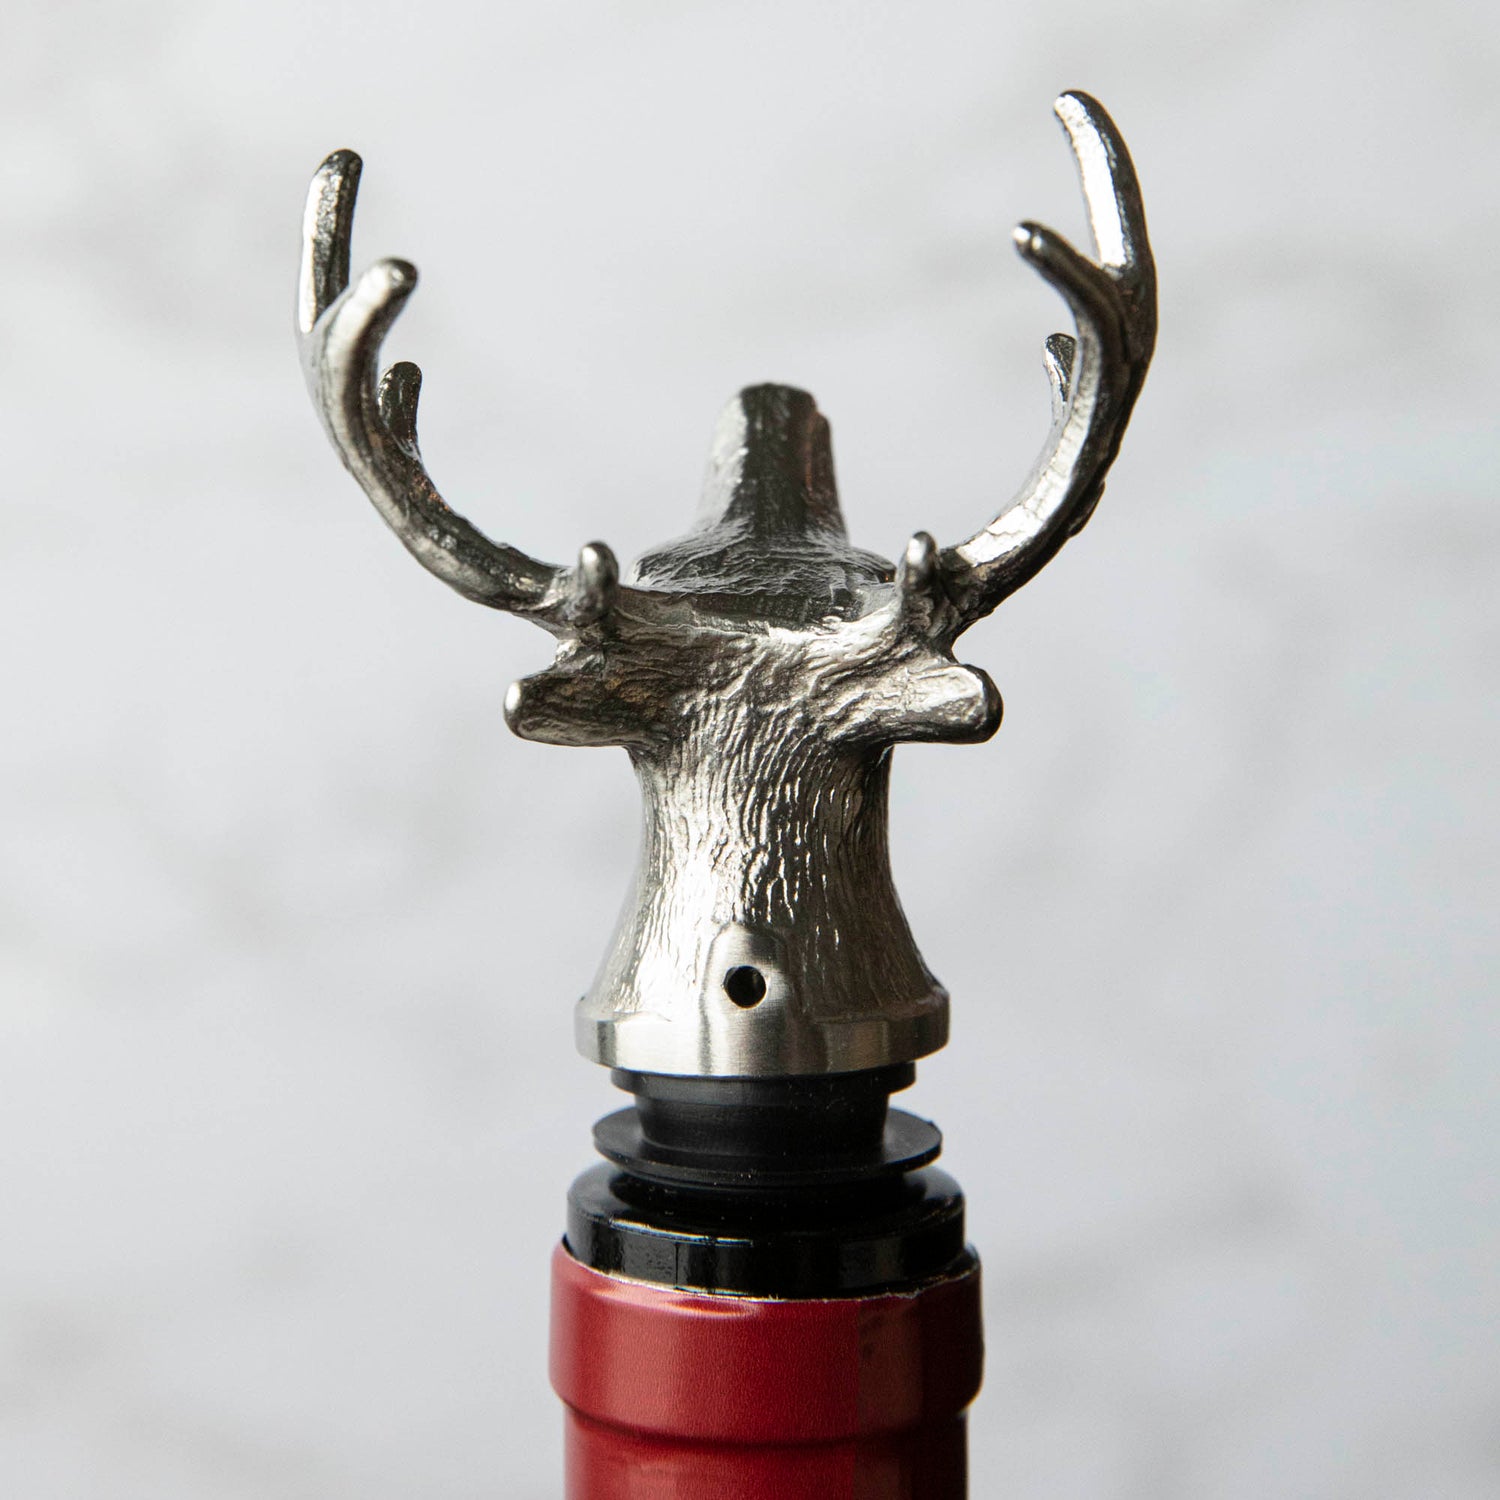 Stainless Steel Goat Wine Pourer and Aerator